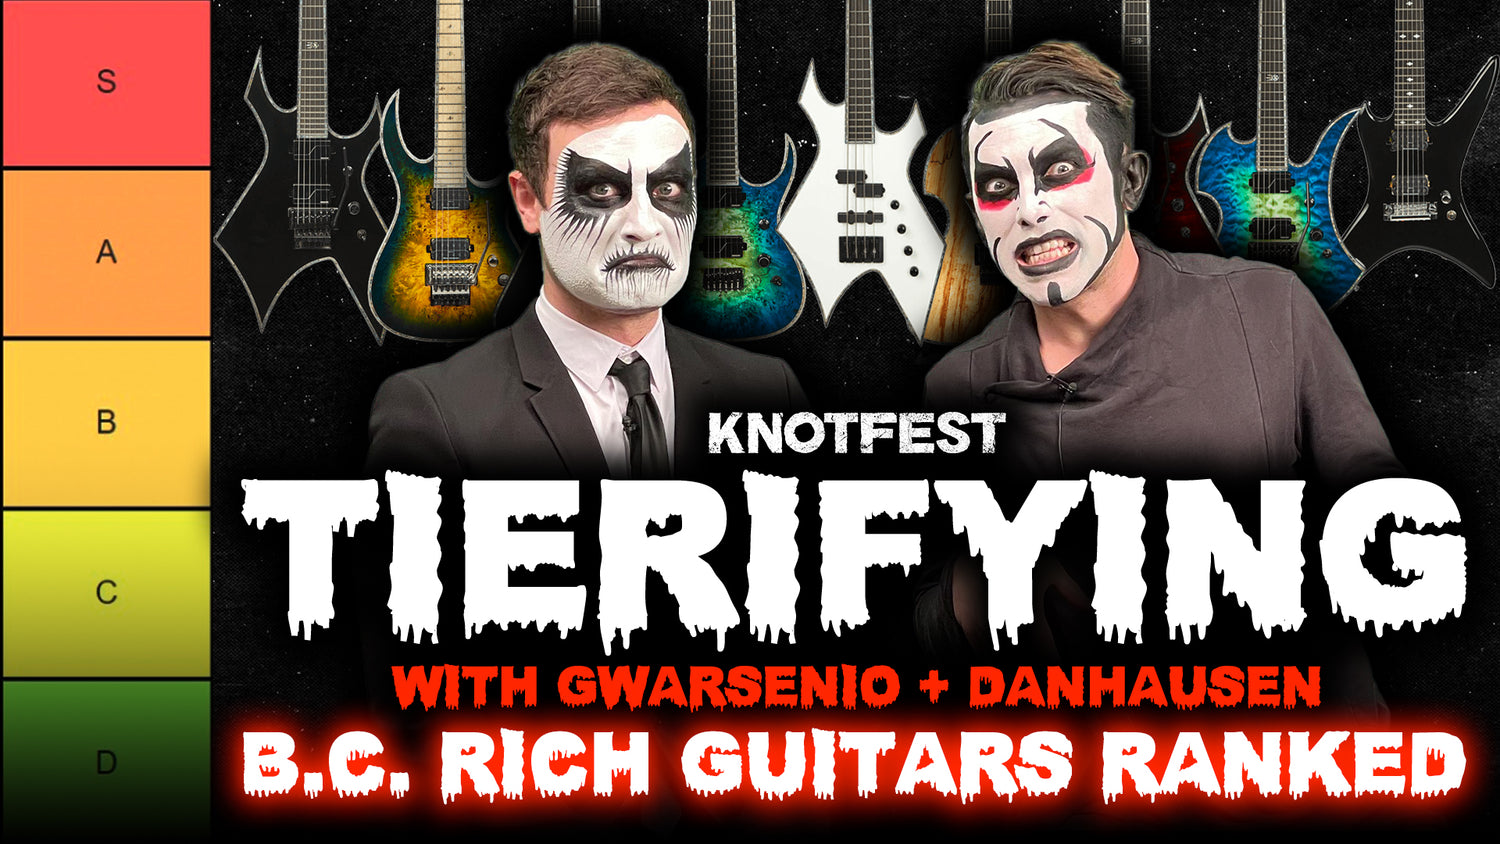 B.C. RICH GUITARS RANKED ON TIERFYING WITH DANHAUSEN AND GWARSENIO HALL